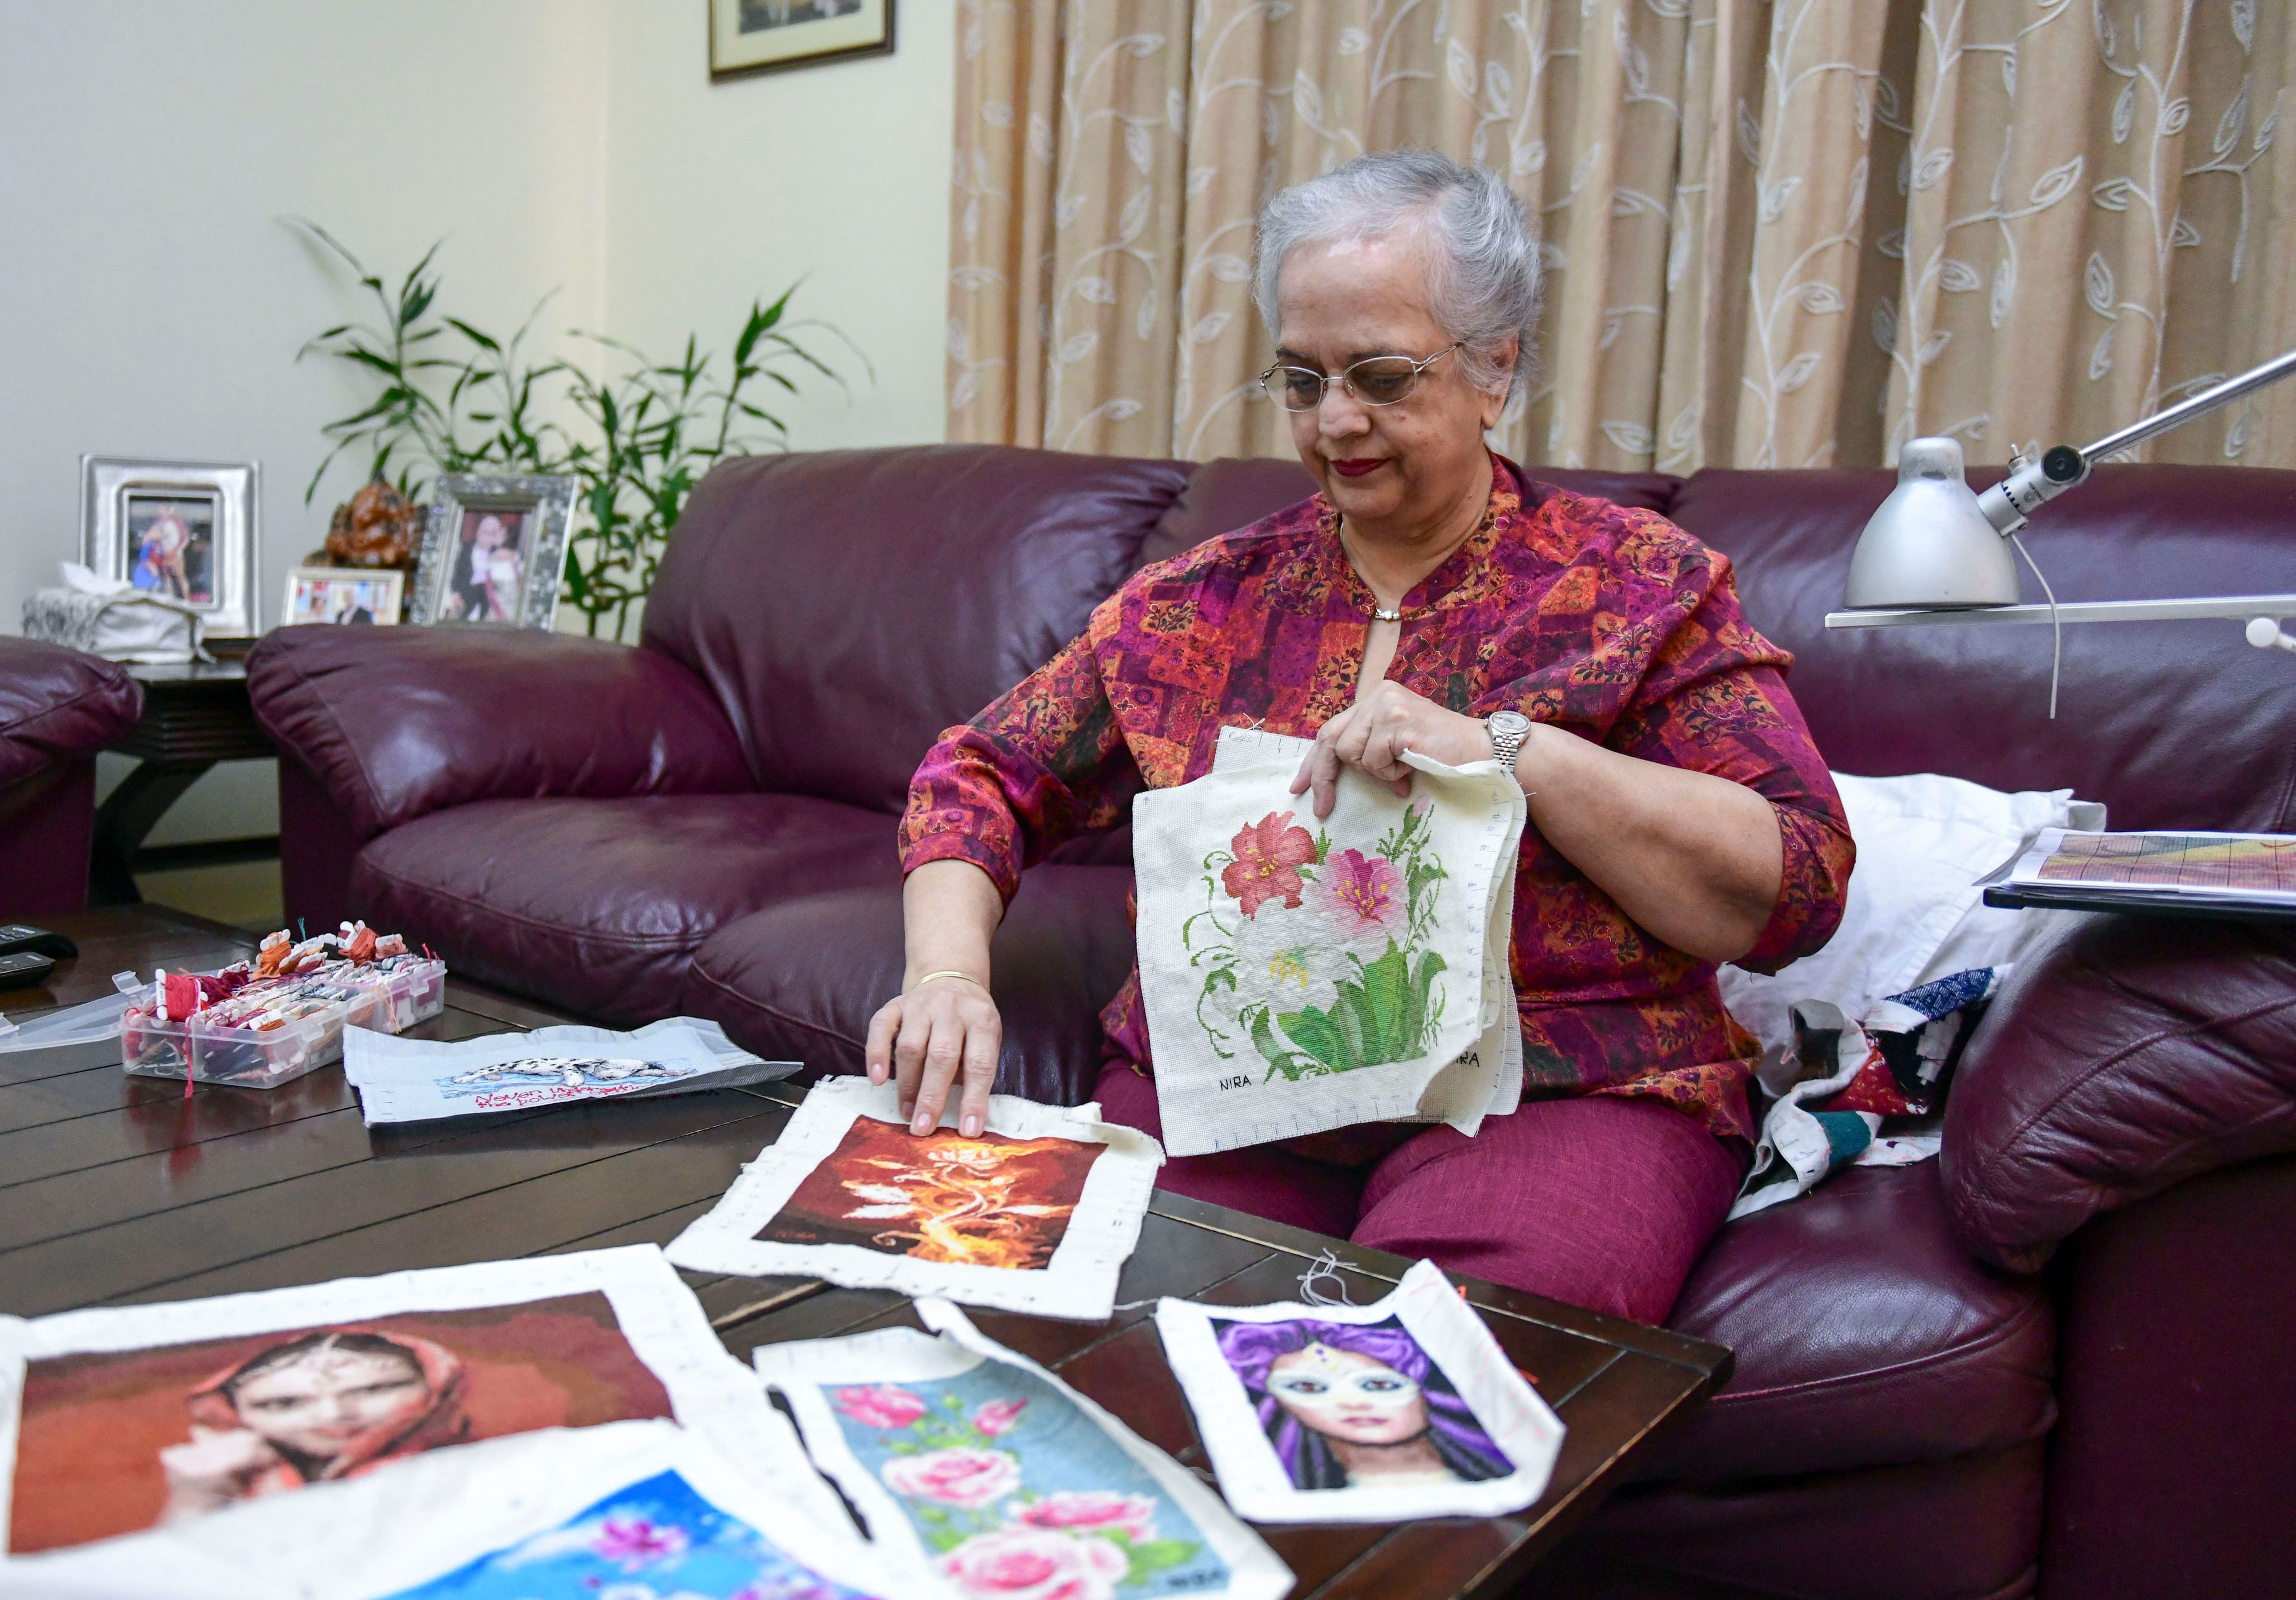 photo essay: abu dhabi artist paints pictures in cross stitches